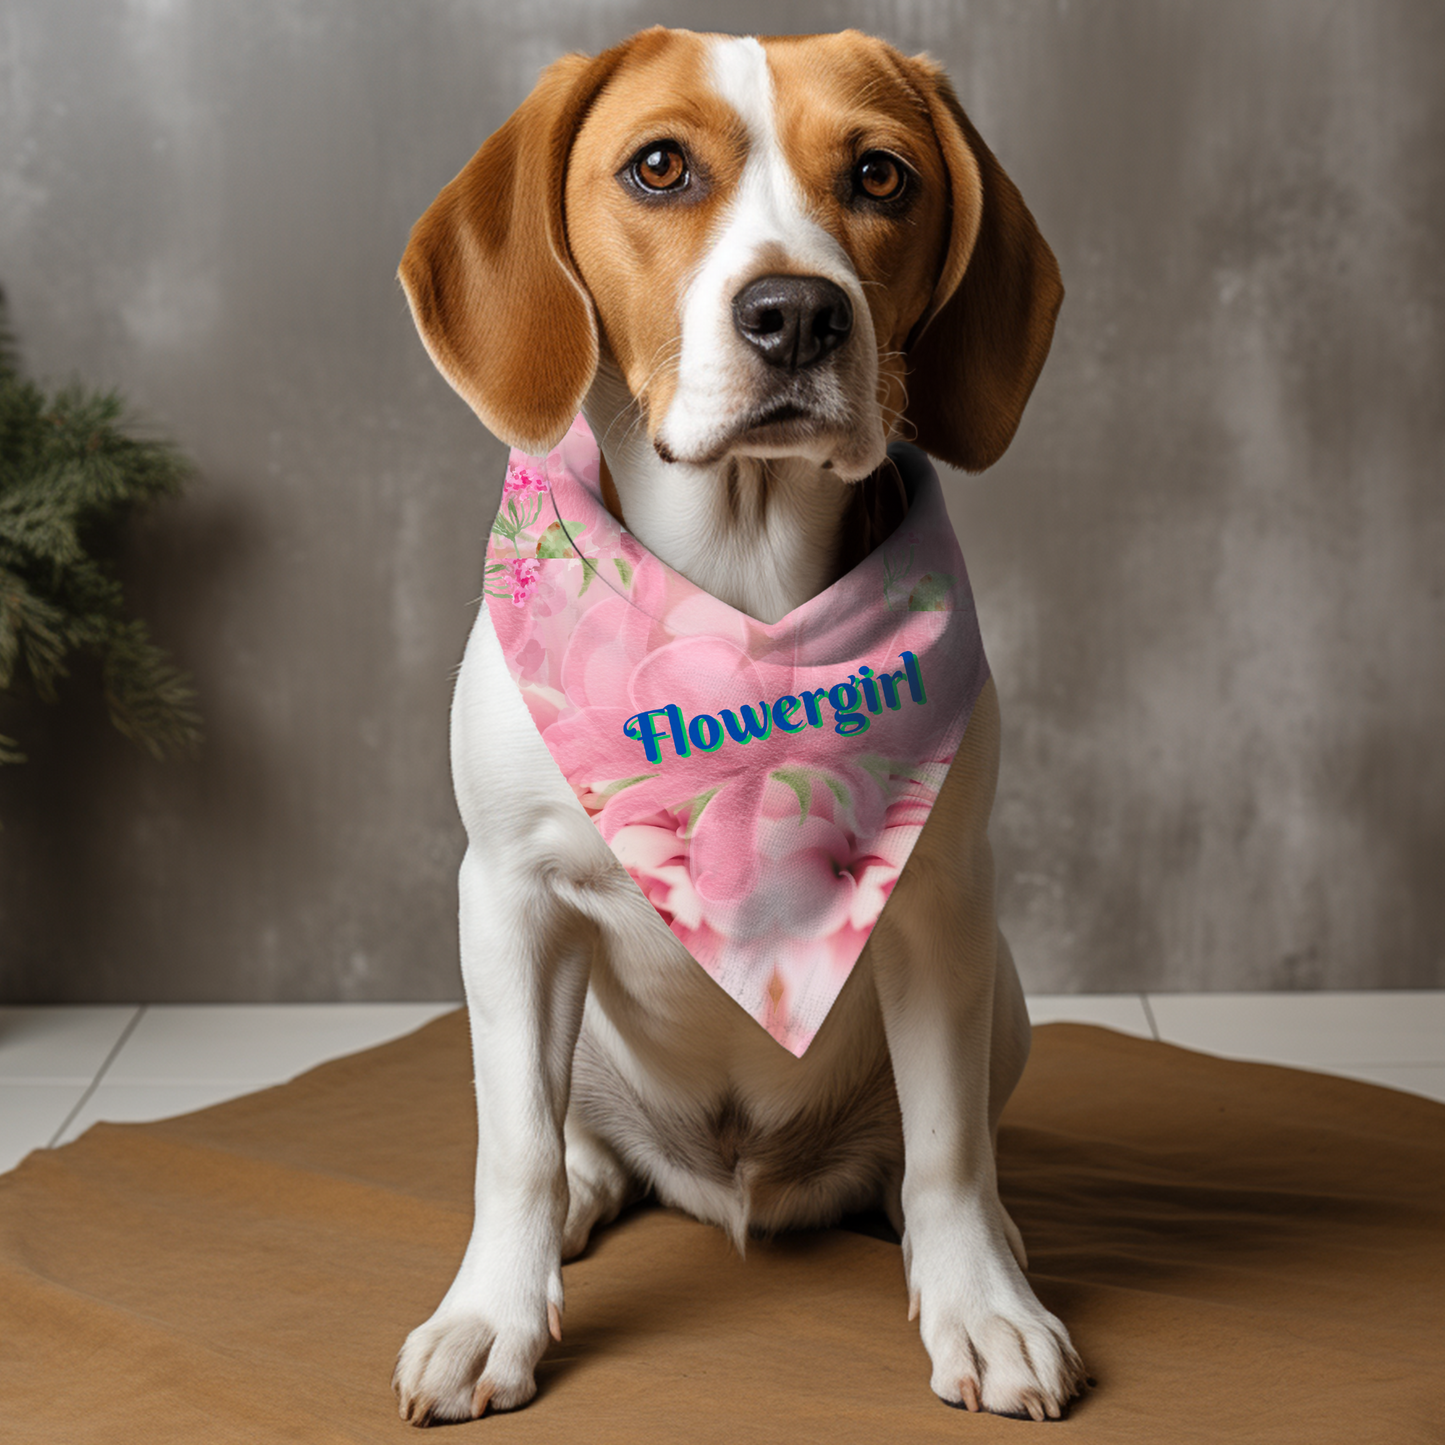 WeddingWhiskers Classic "Flowergirl"  Pet Bandana, Engagement Announcement, Wedding Party Gift For Bride, Groom, Dog Mom